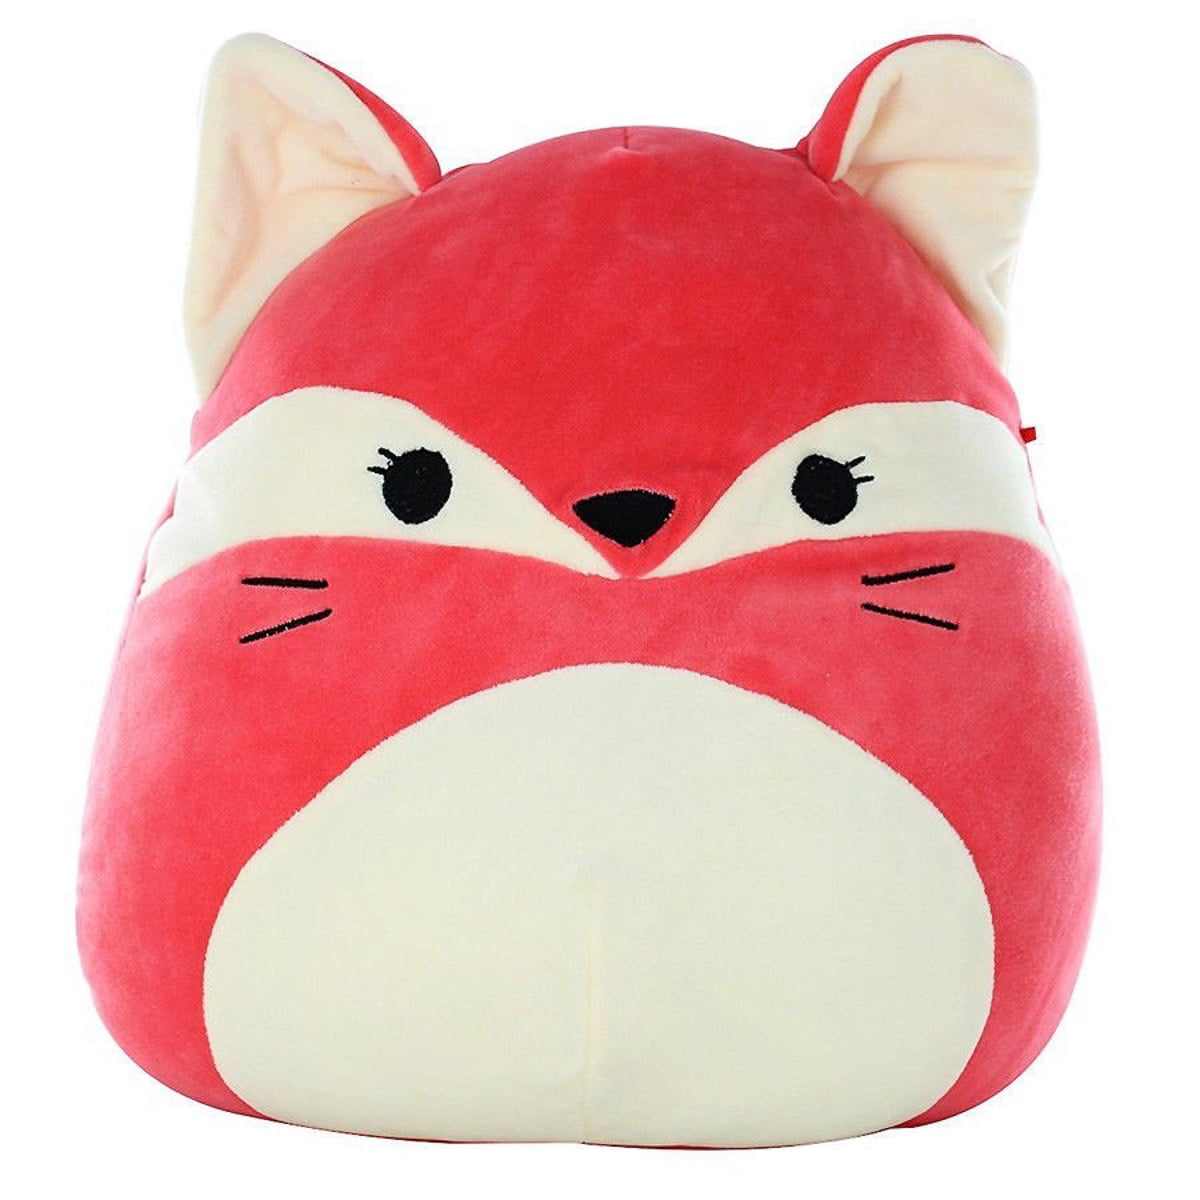 623136 for sale online Squishmallows Fifi The Fox Marshmallow 16 inch Plush Toy 